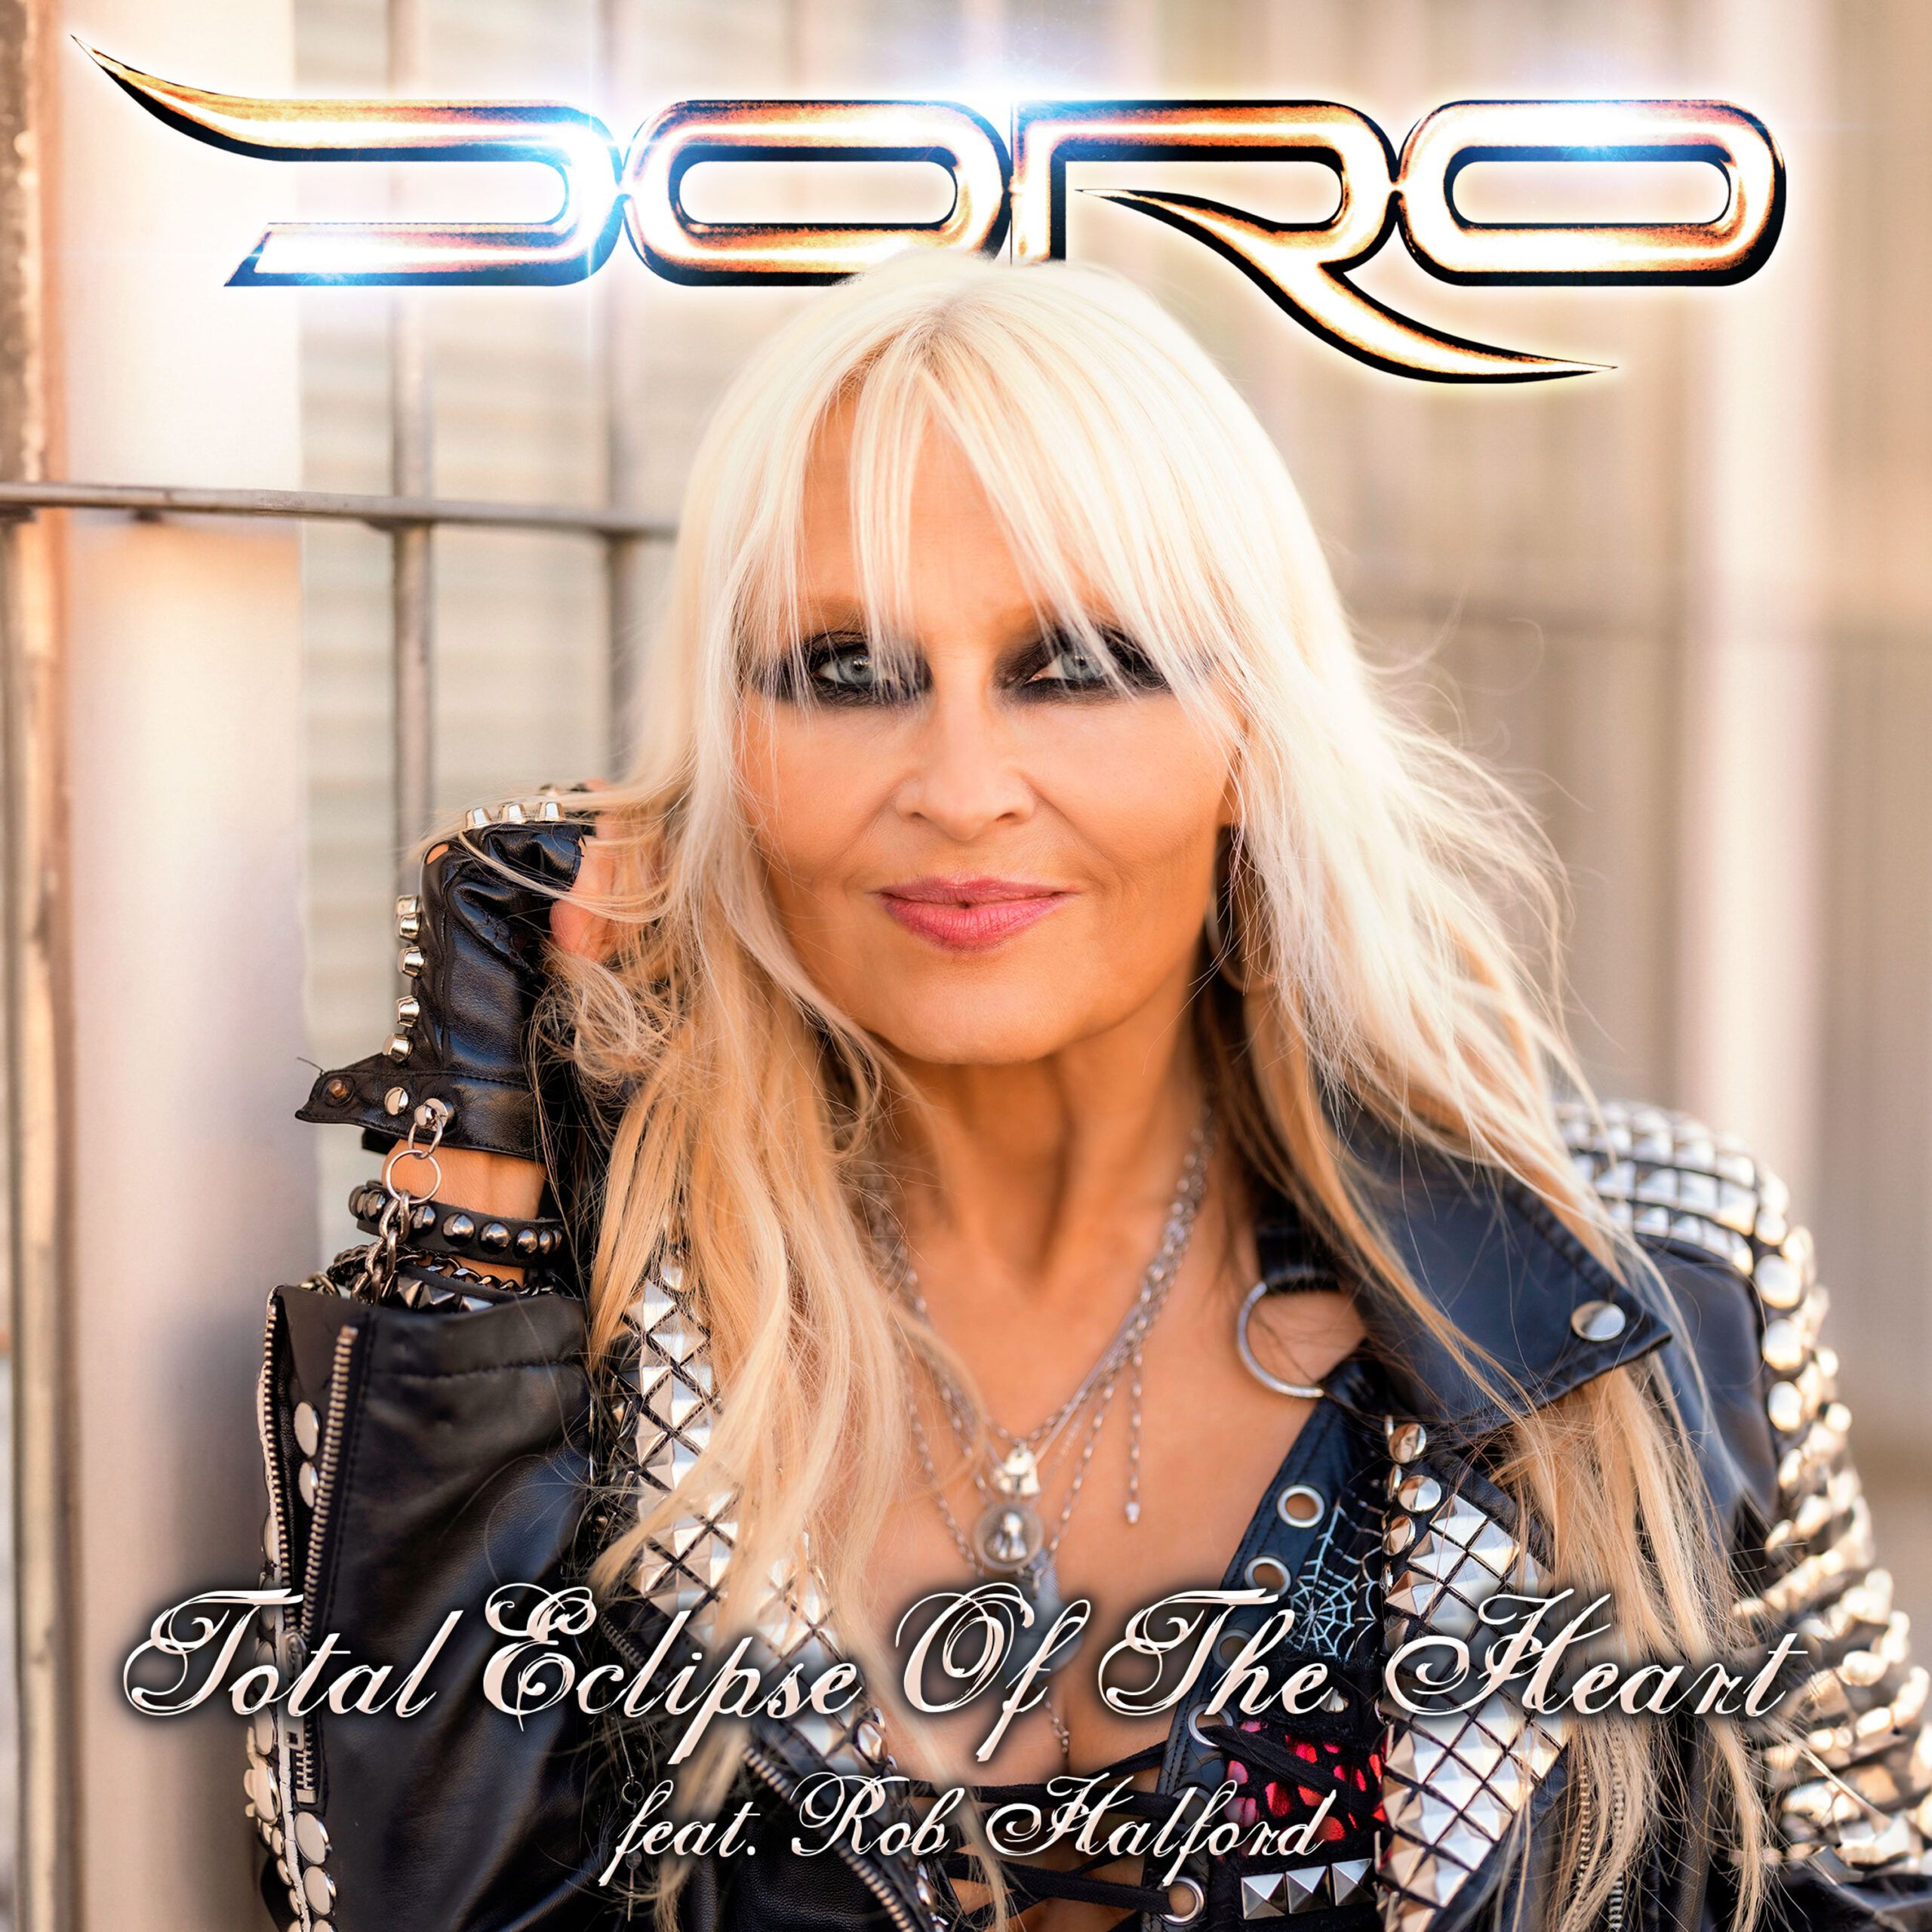 Doro - 'Total Eclipse Of The Heart'